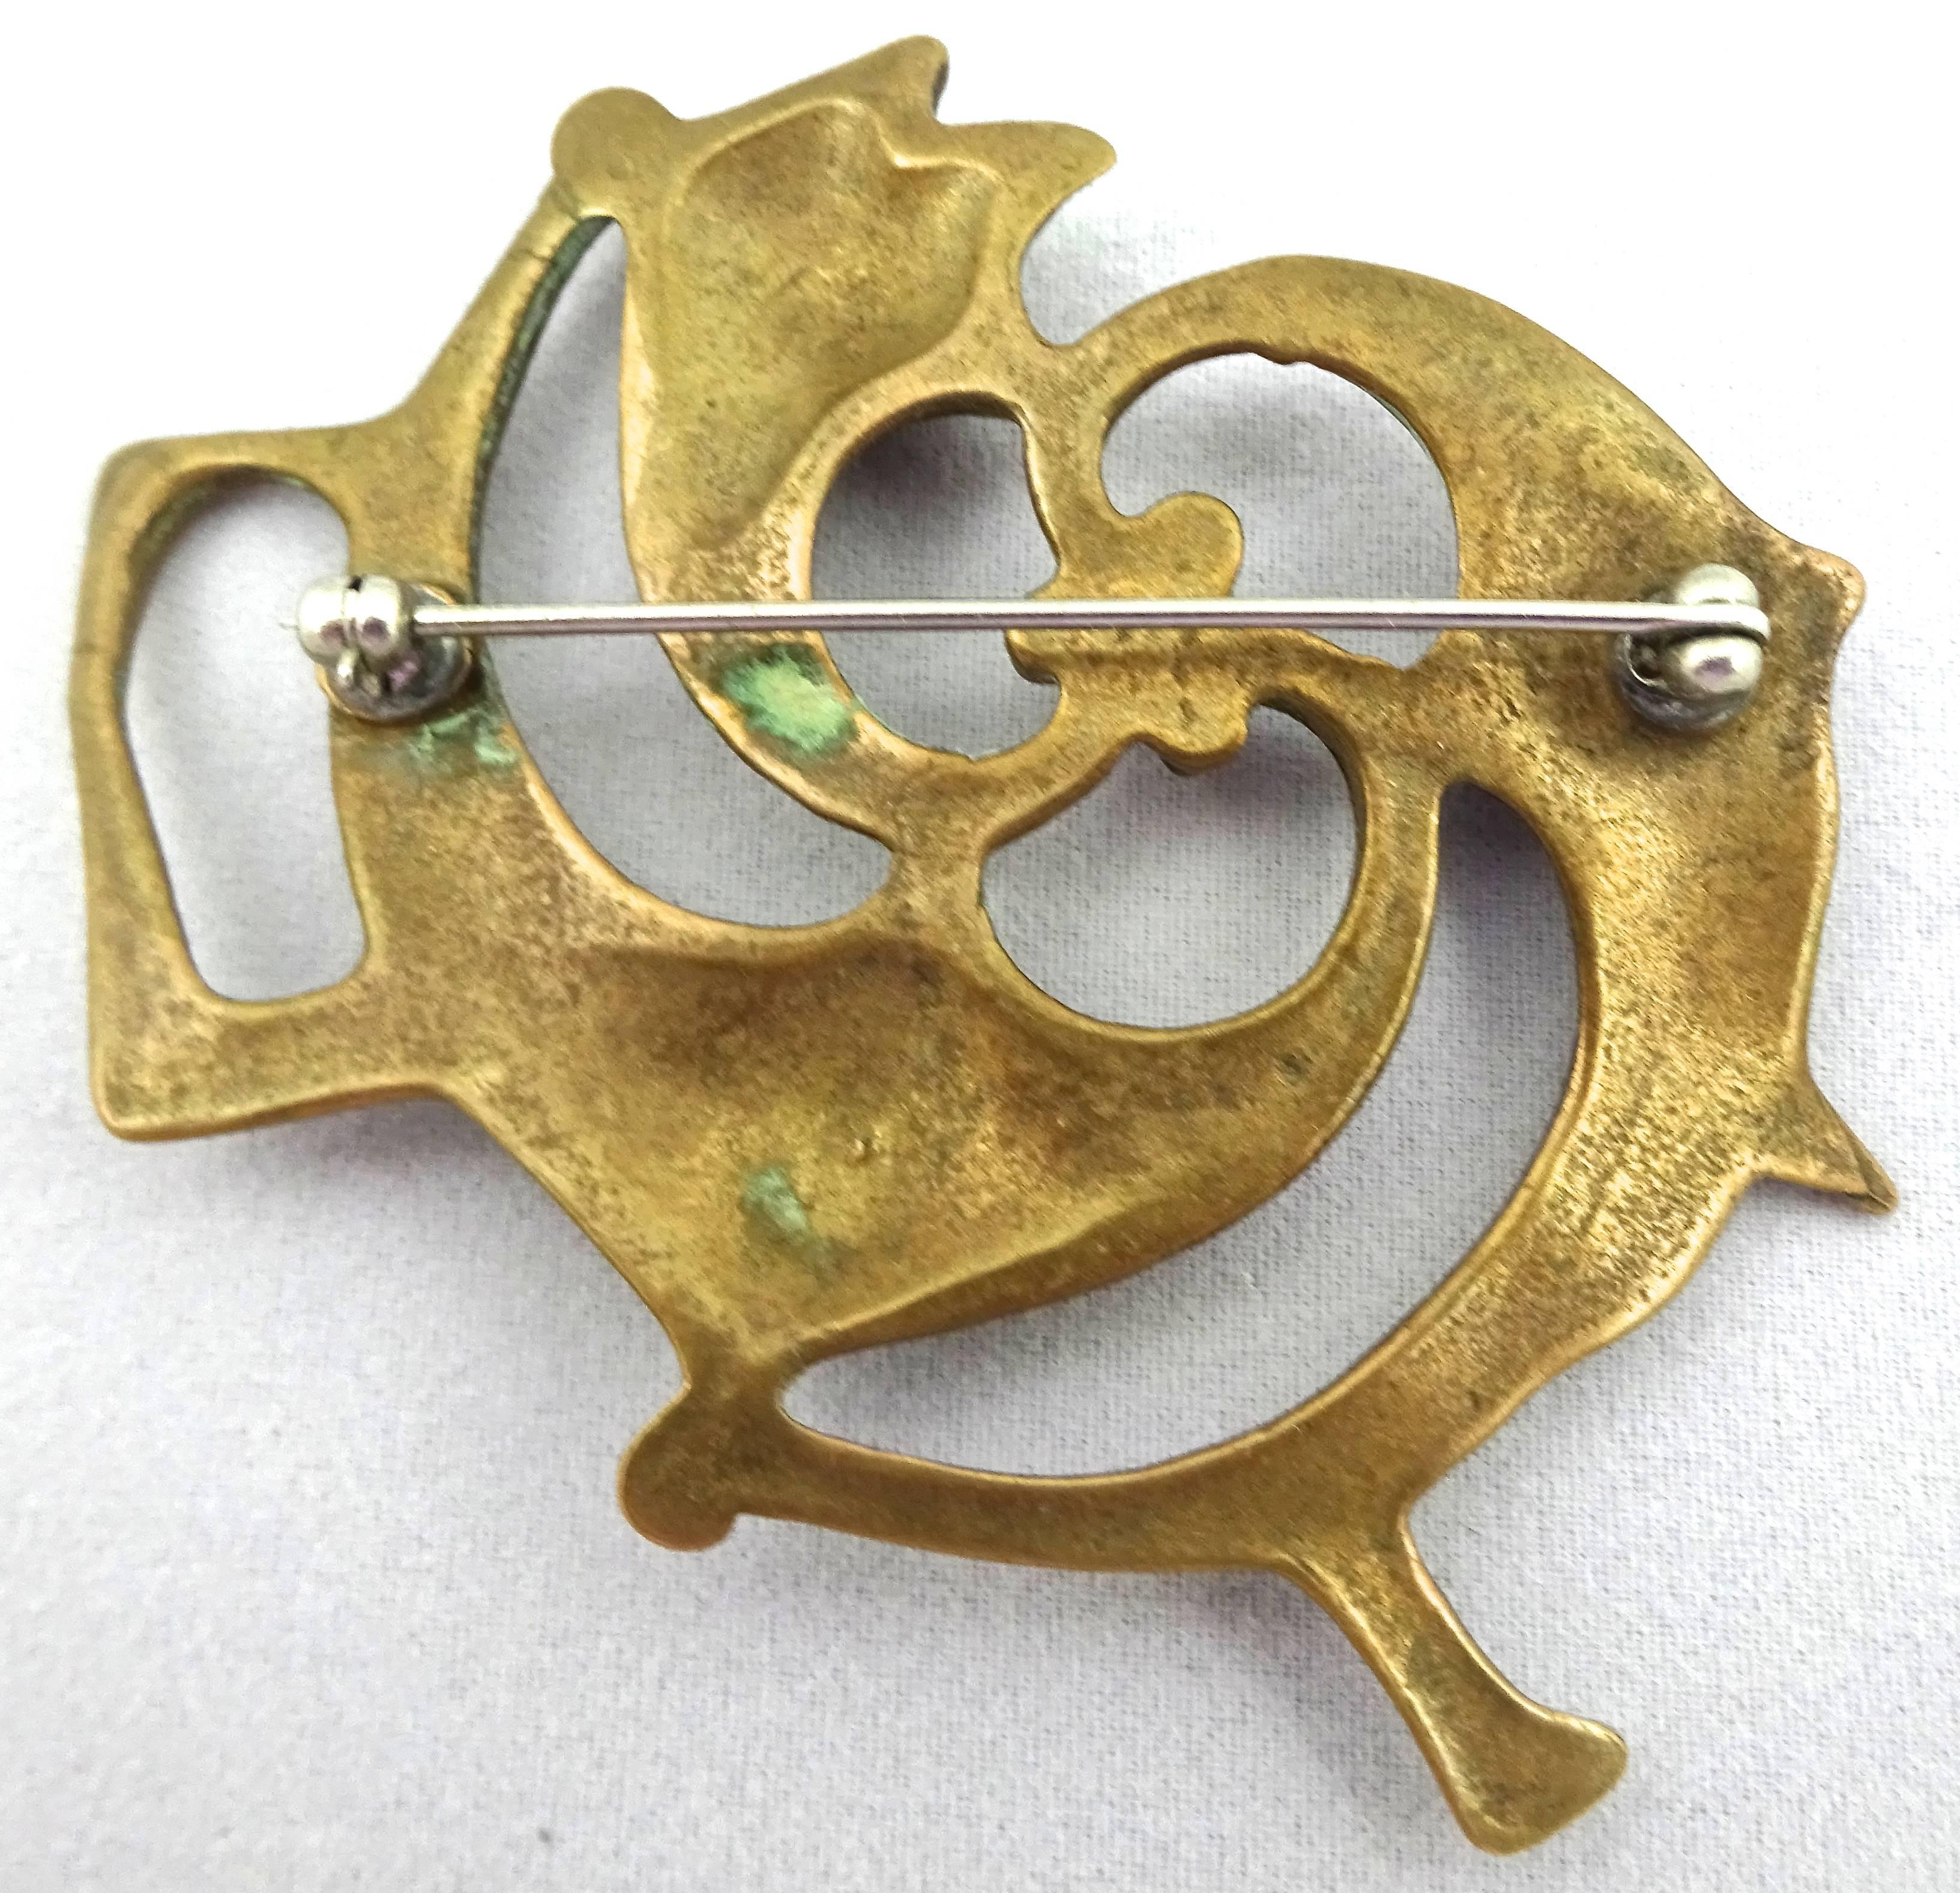 Sculptural 1950s Danish Modern Bronze Brooch In Excellent Condition For Sale In Washington, DC